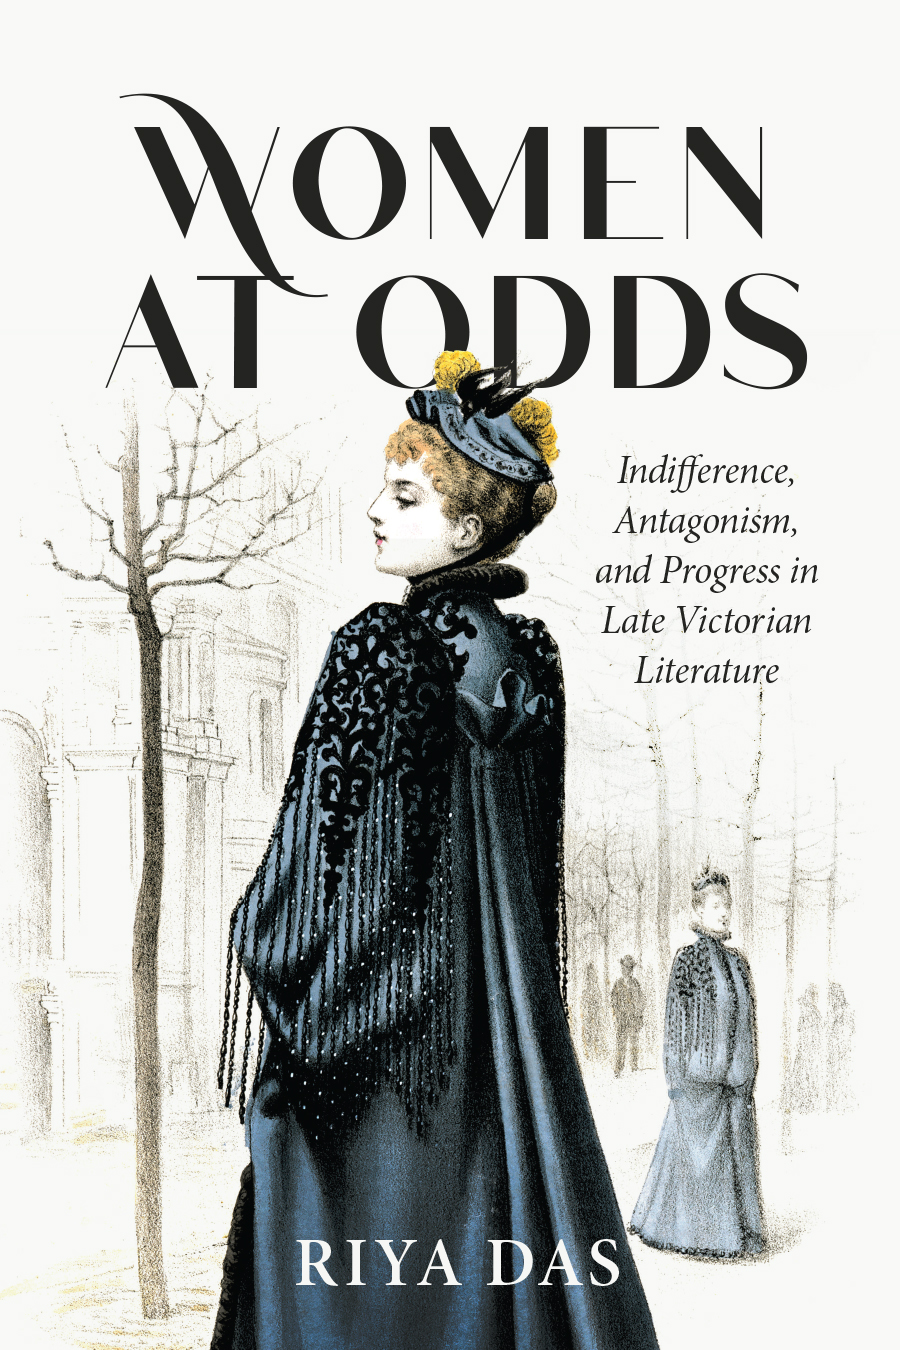 Front cover of Women at Odds: Indifference, Antagonism, and Progress in Late Victorian Literature, by Riya Das, featuring a Victorian-era image of a woman in a dark blue dress and hat, turning haughtily away from another woman in the background.